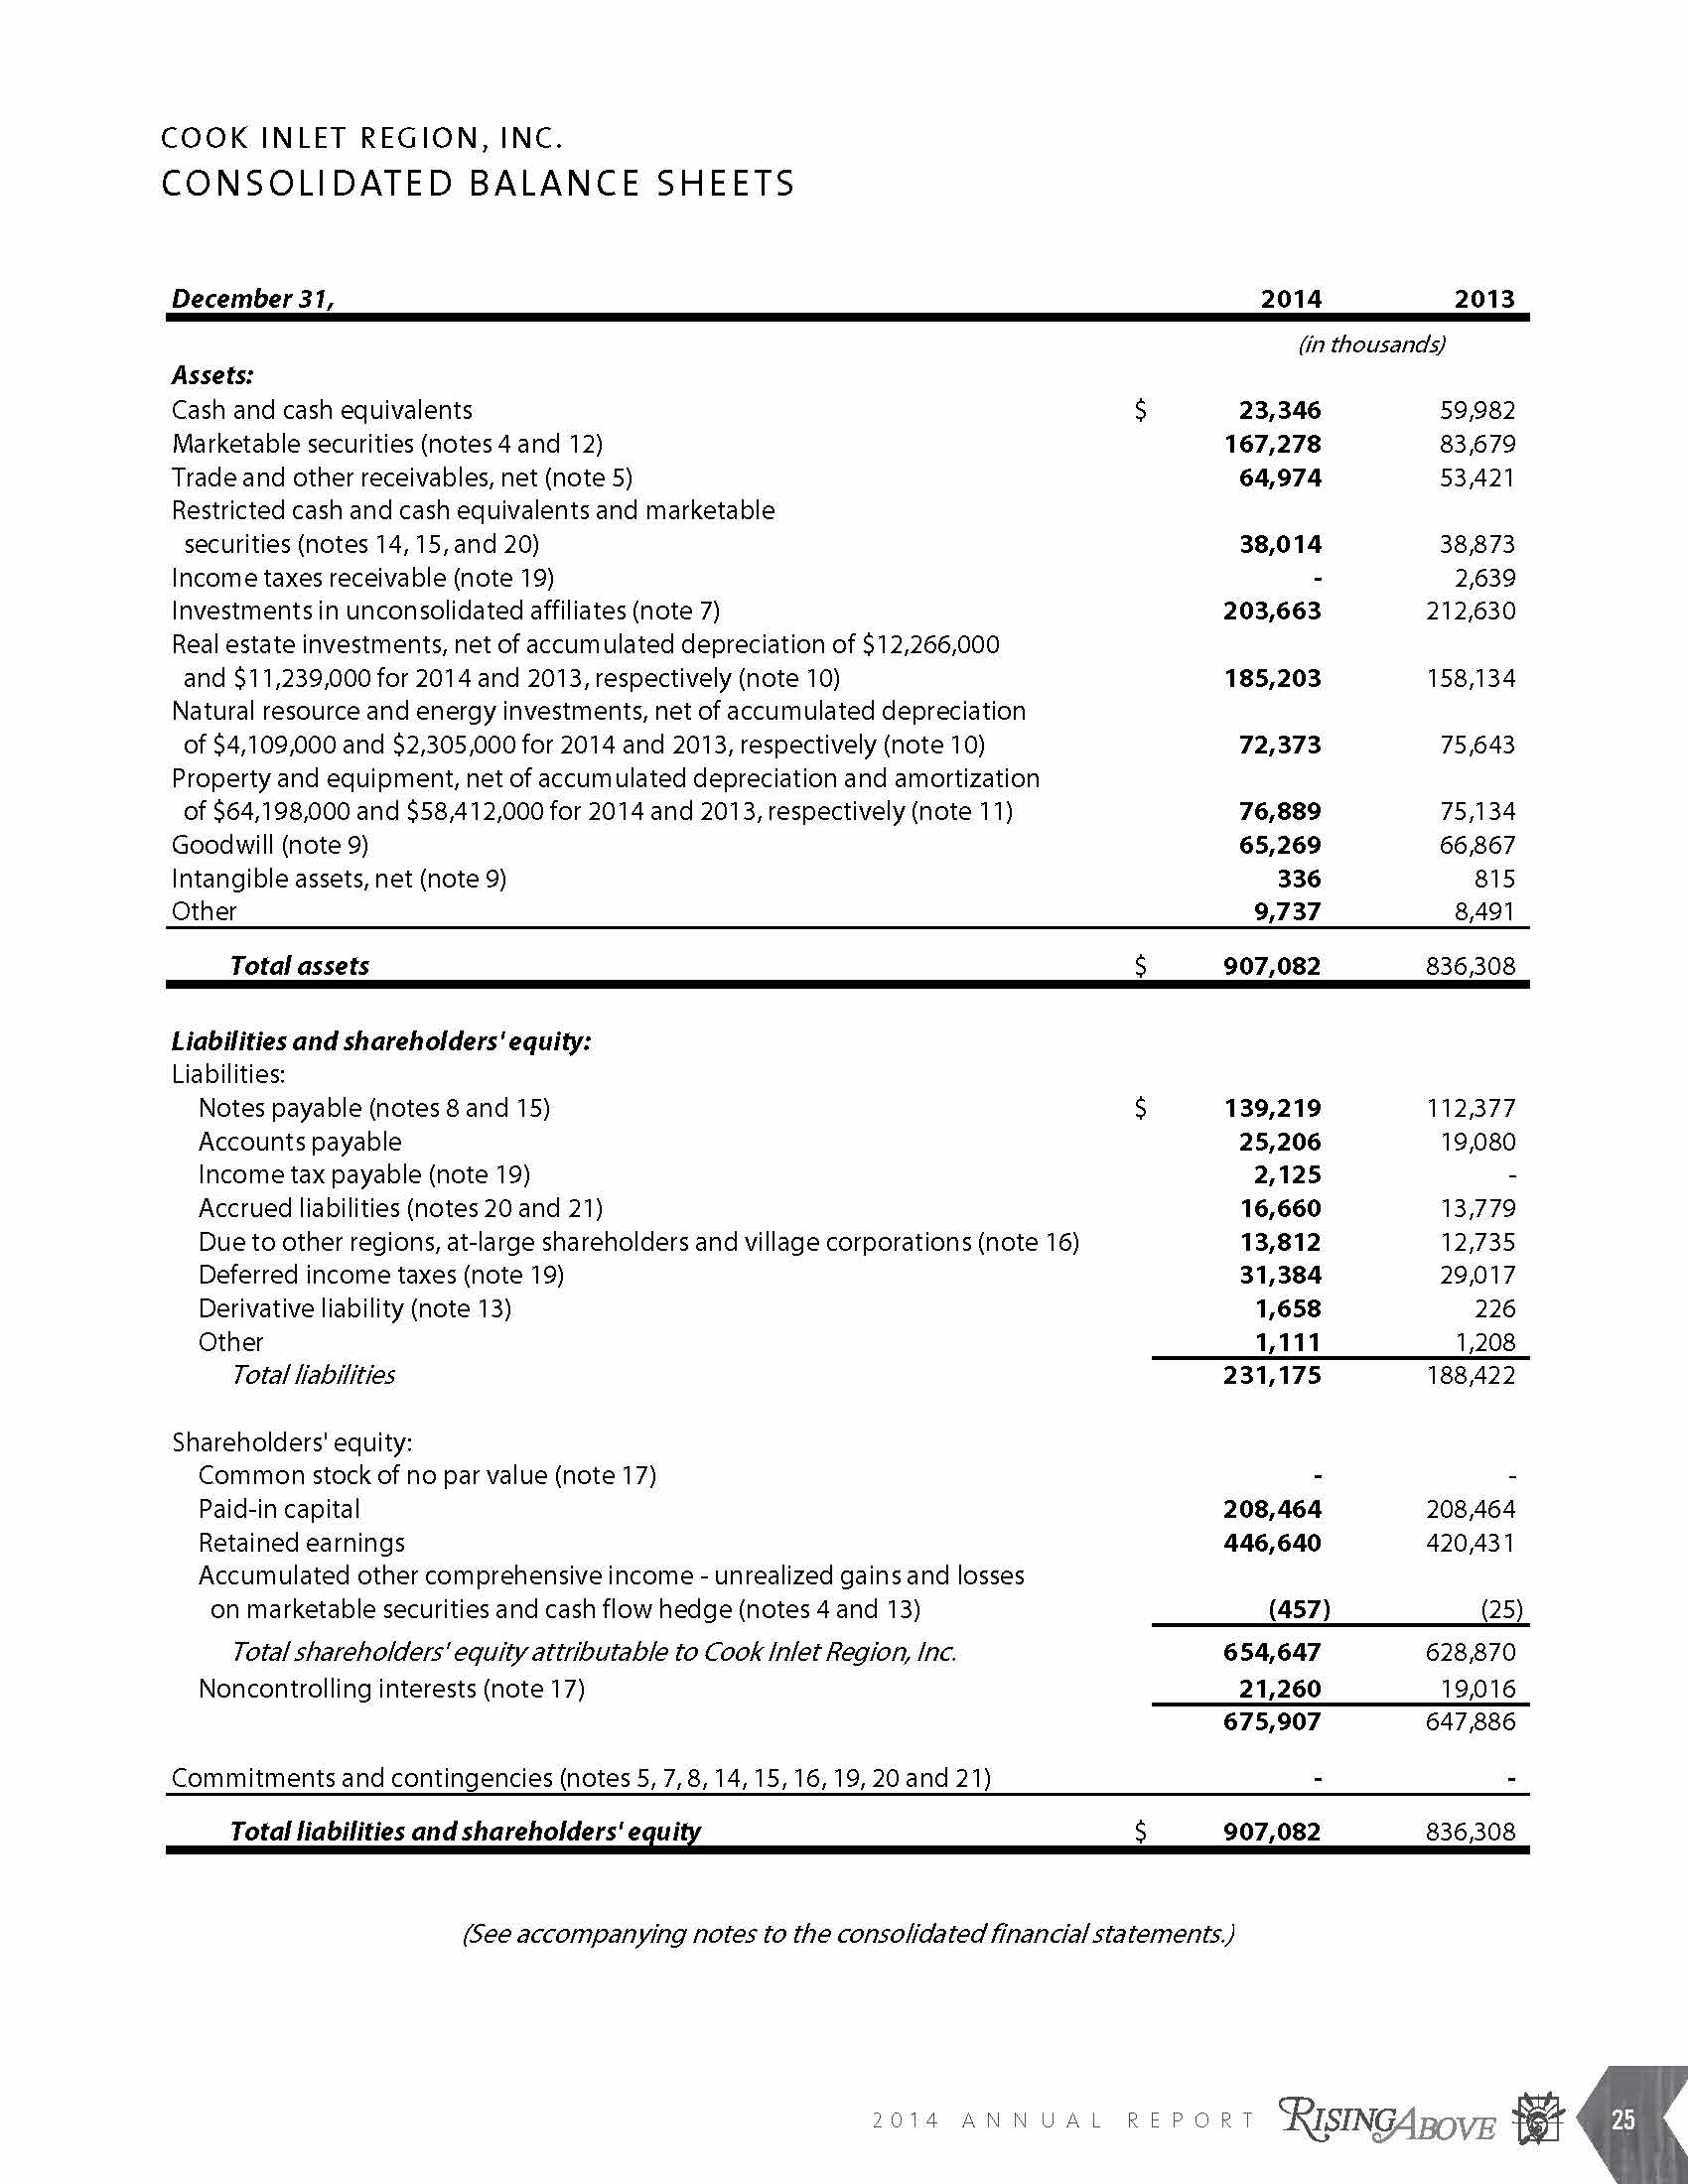 Annual Report - Consolidated Balance Sheets